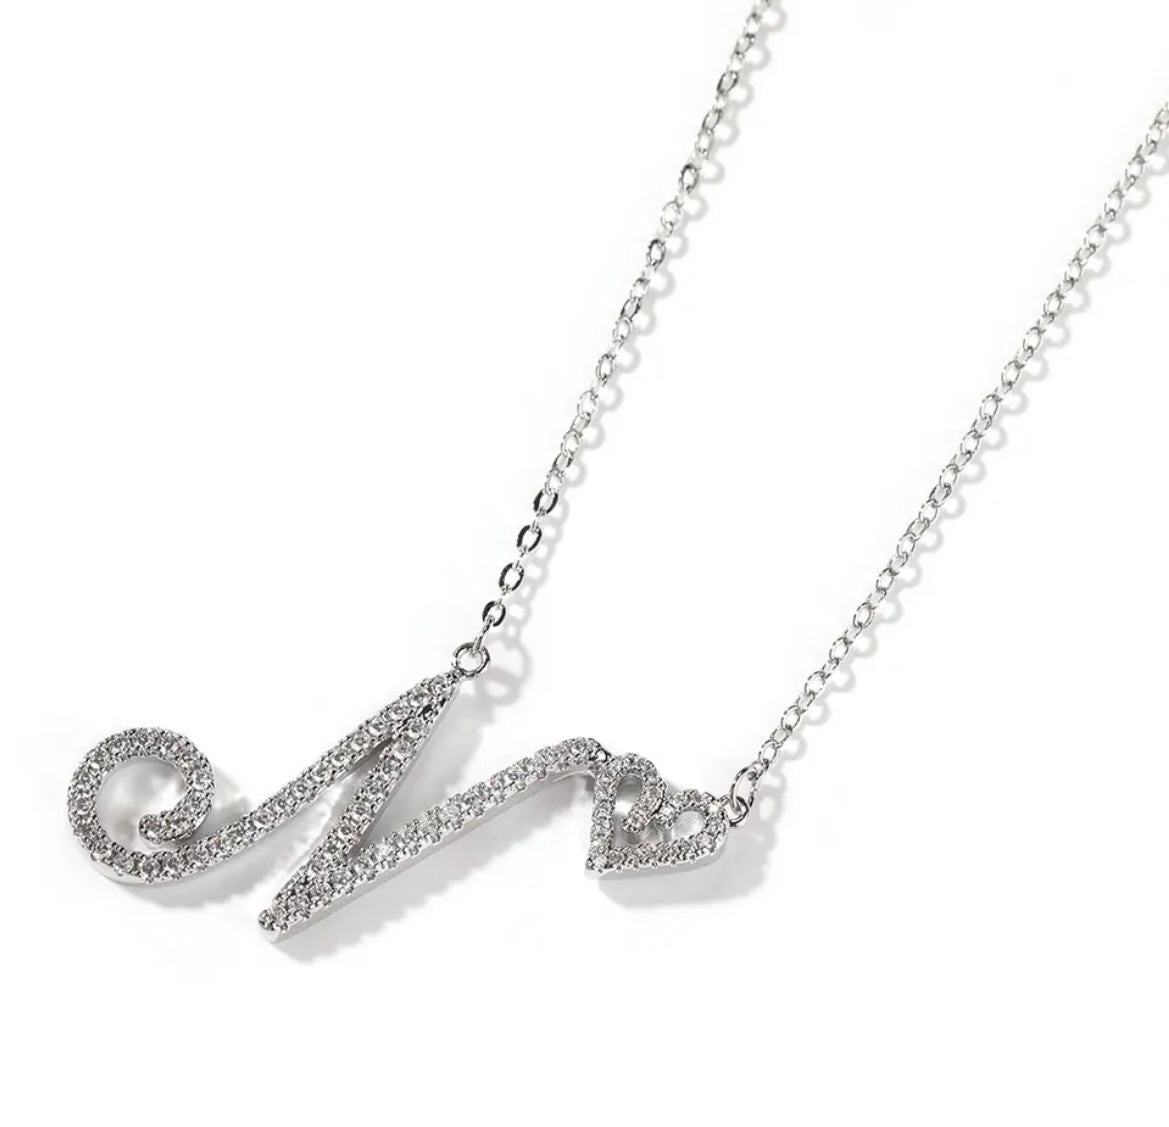 heart initial necklace